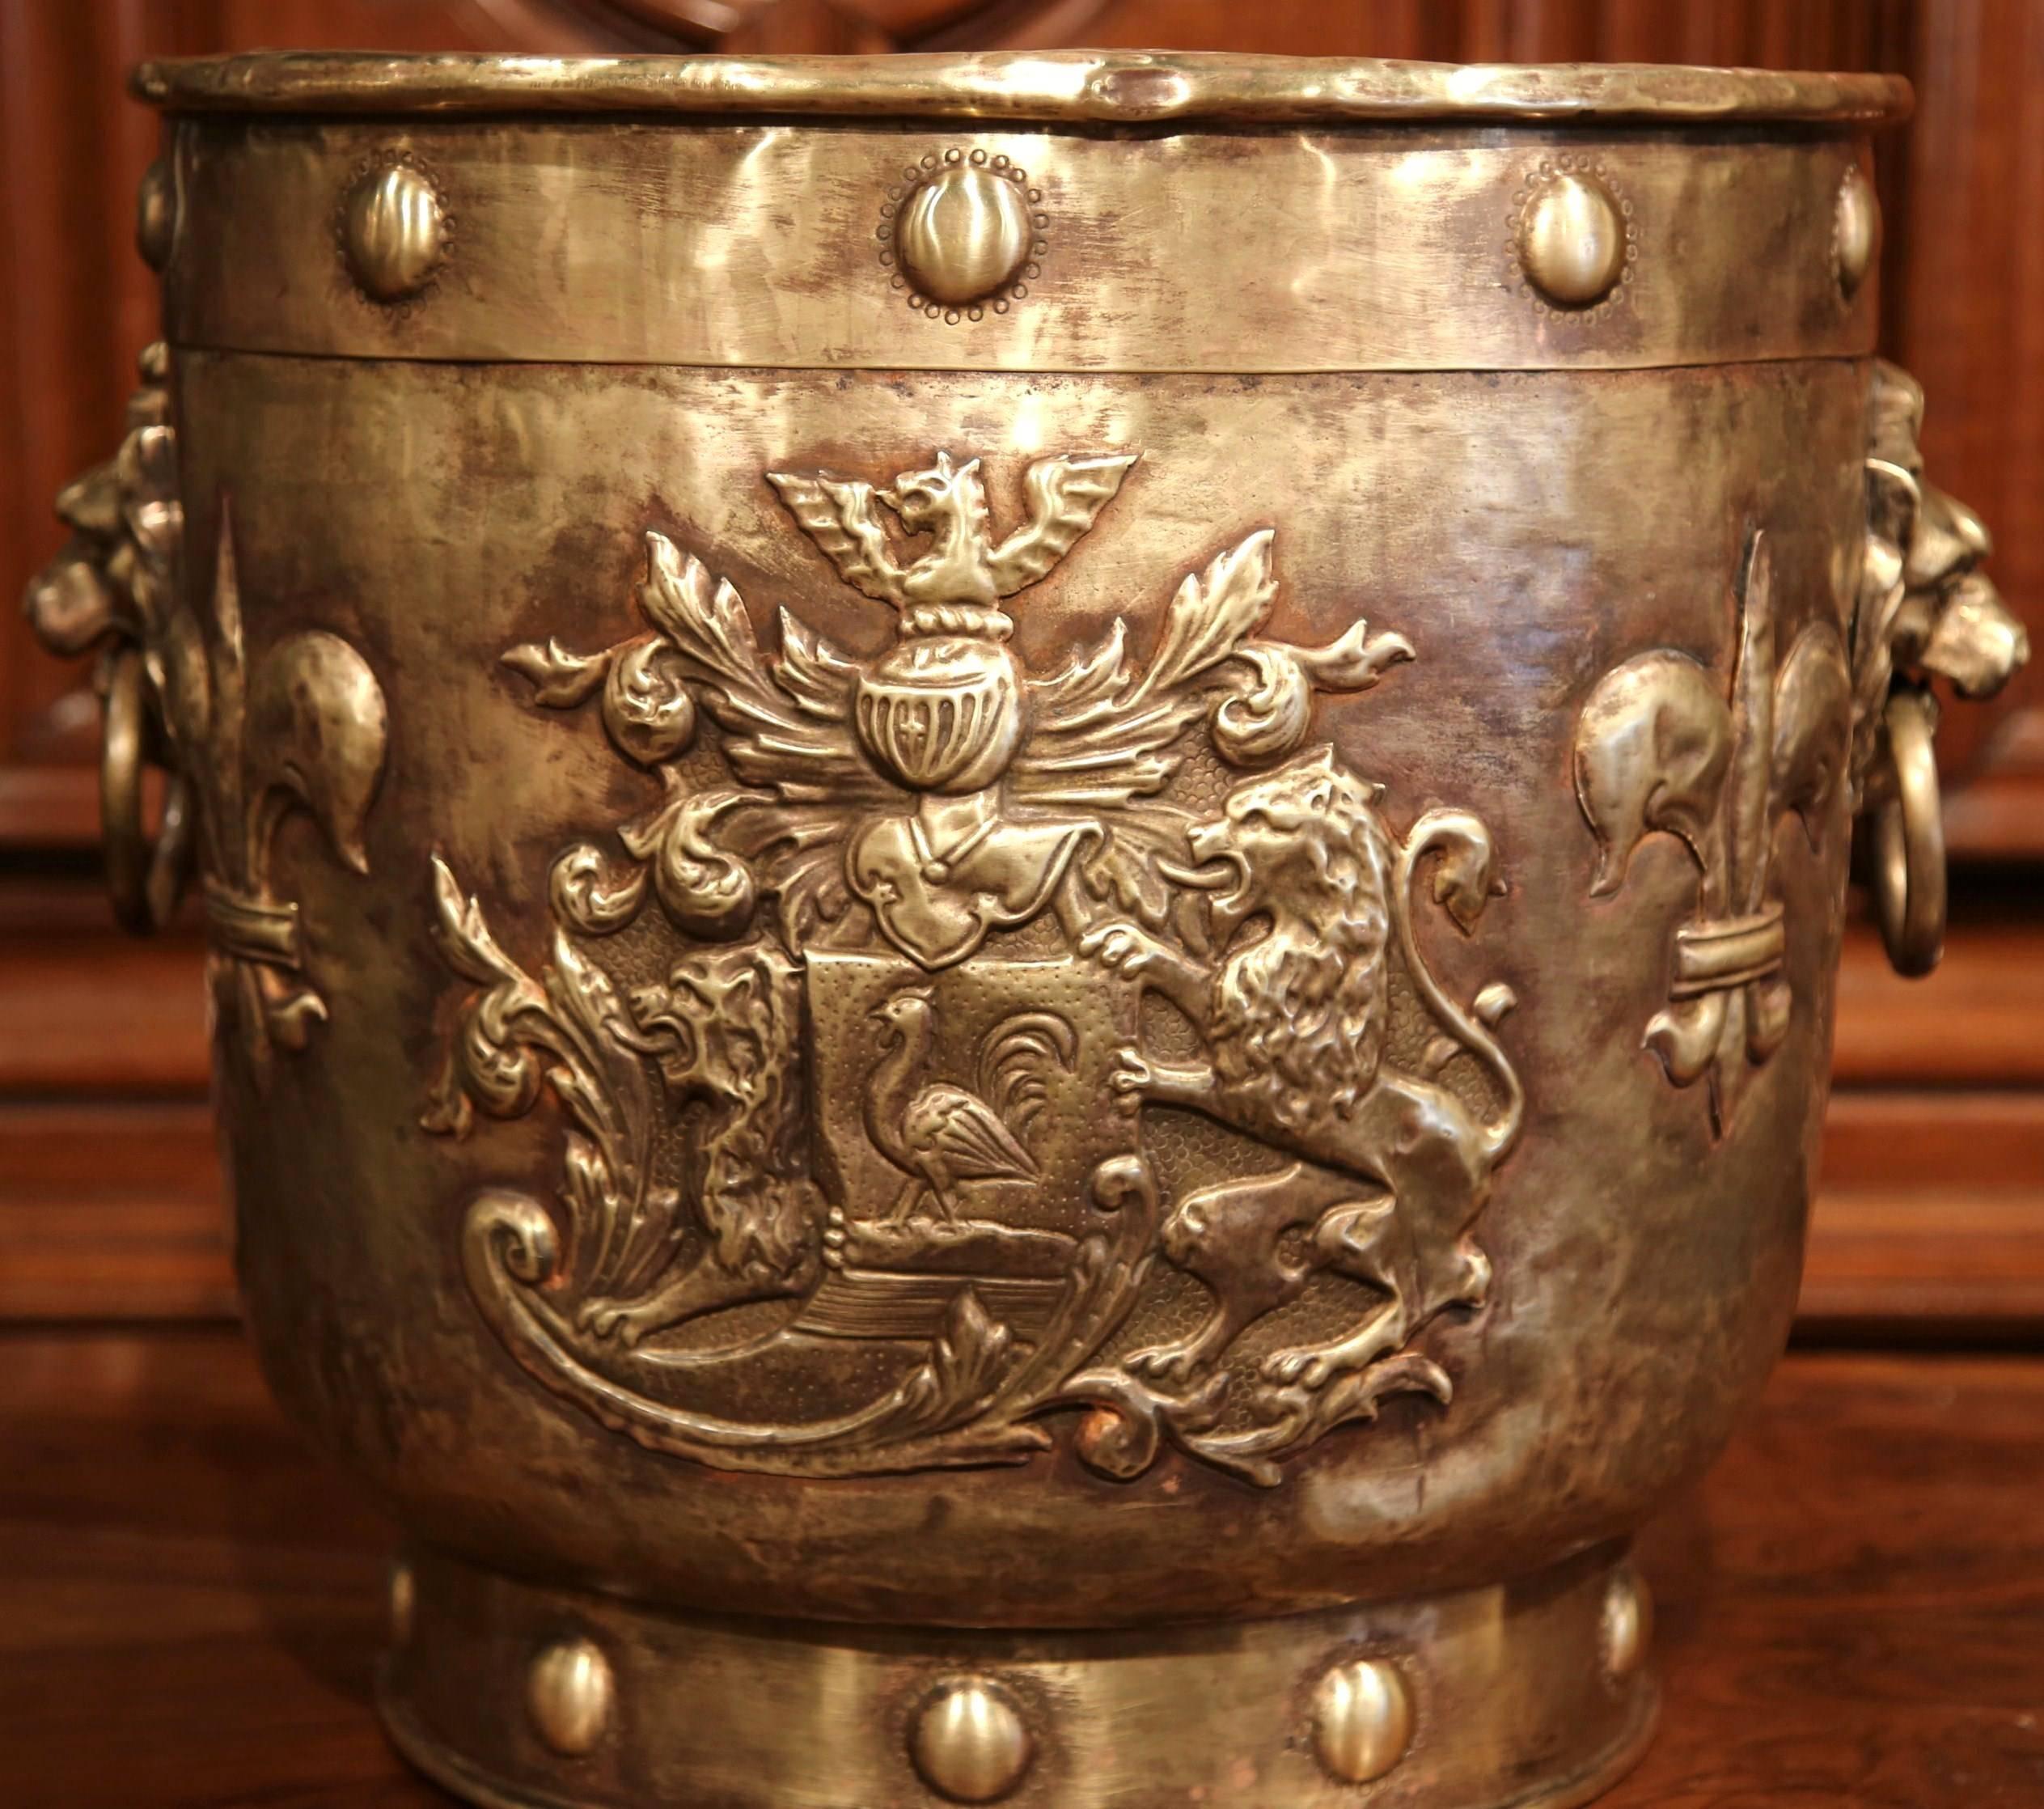 Gothic Large 19th Century French Brass Bucket with Repousse Motifs and Fleur-de-Lys